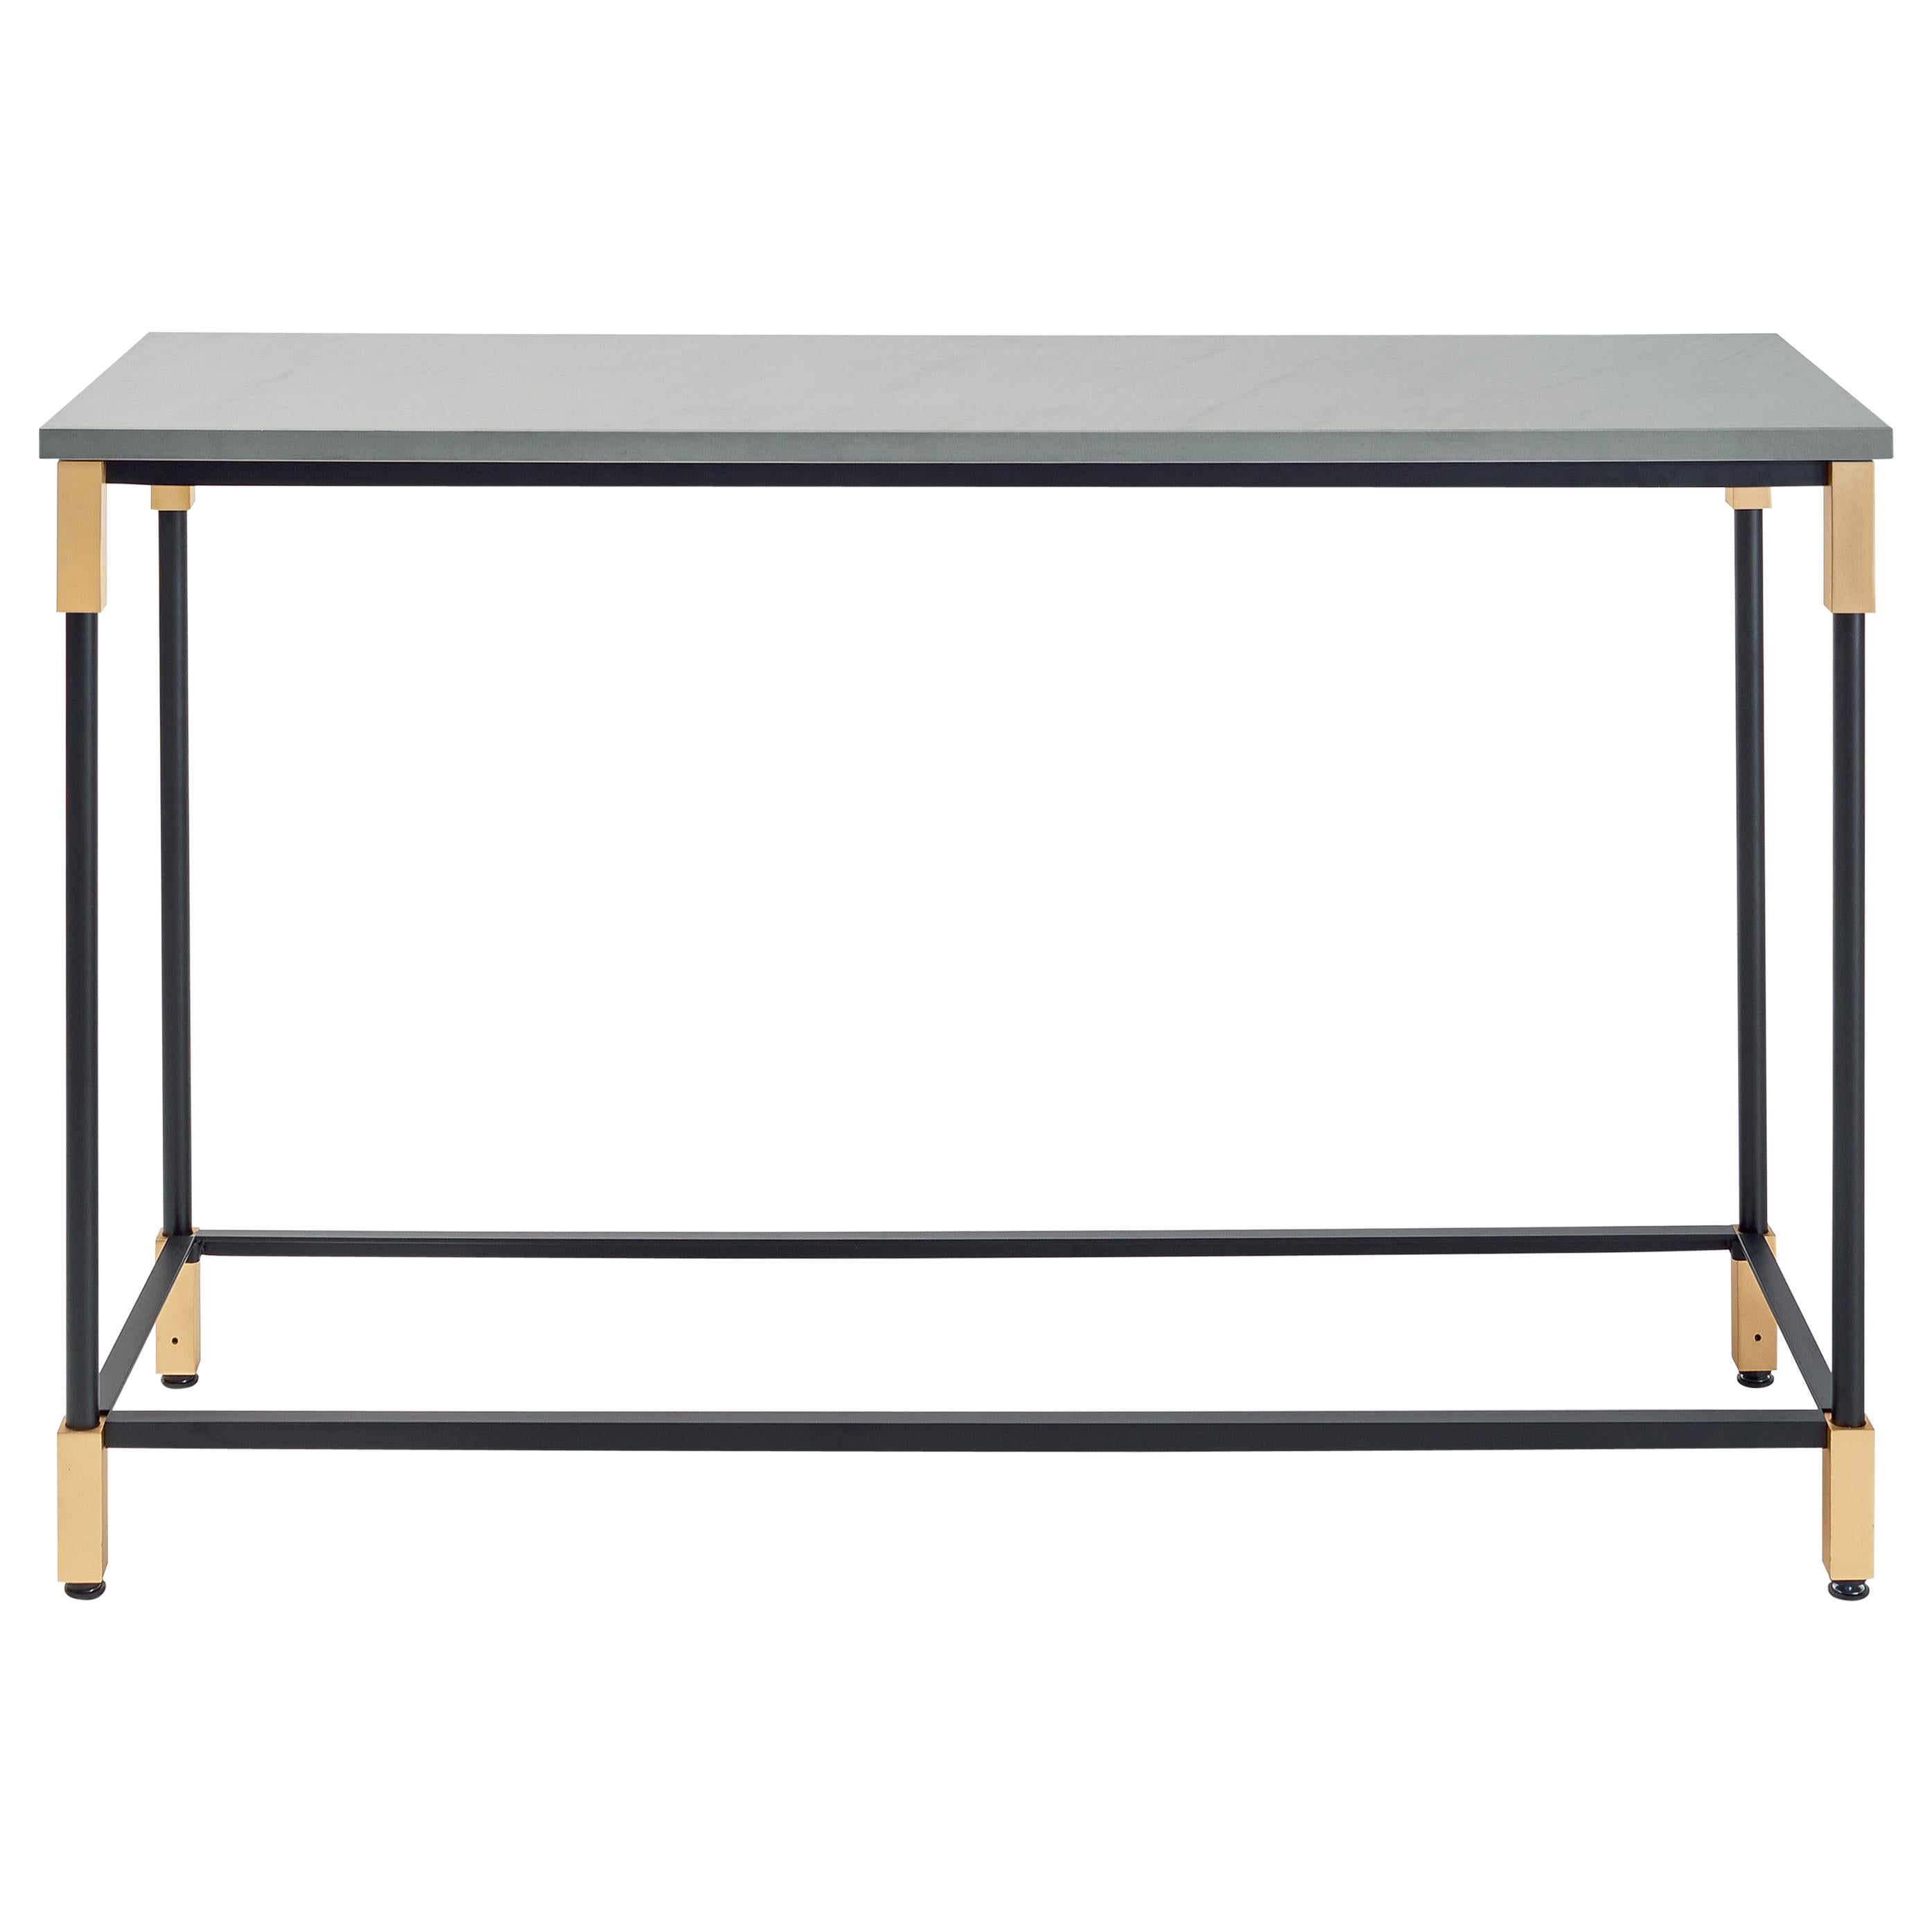 Arflex Match Console Table with Quarzite Silver Marble Top by Bernhardt & Vella For Sale